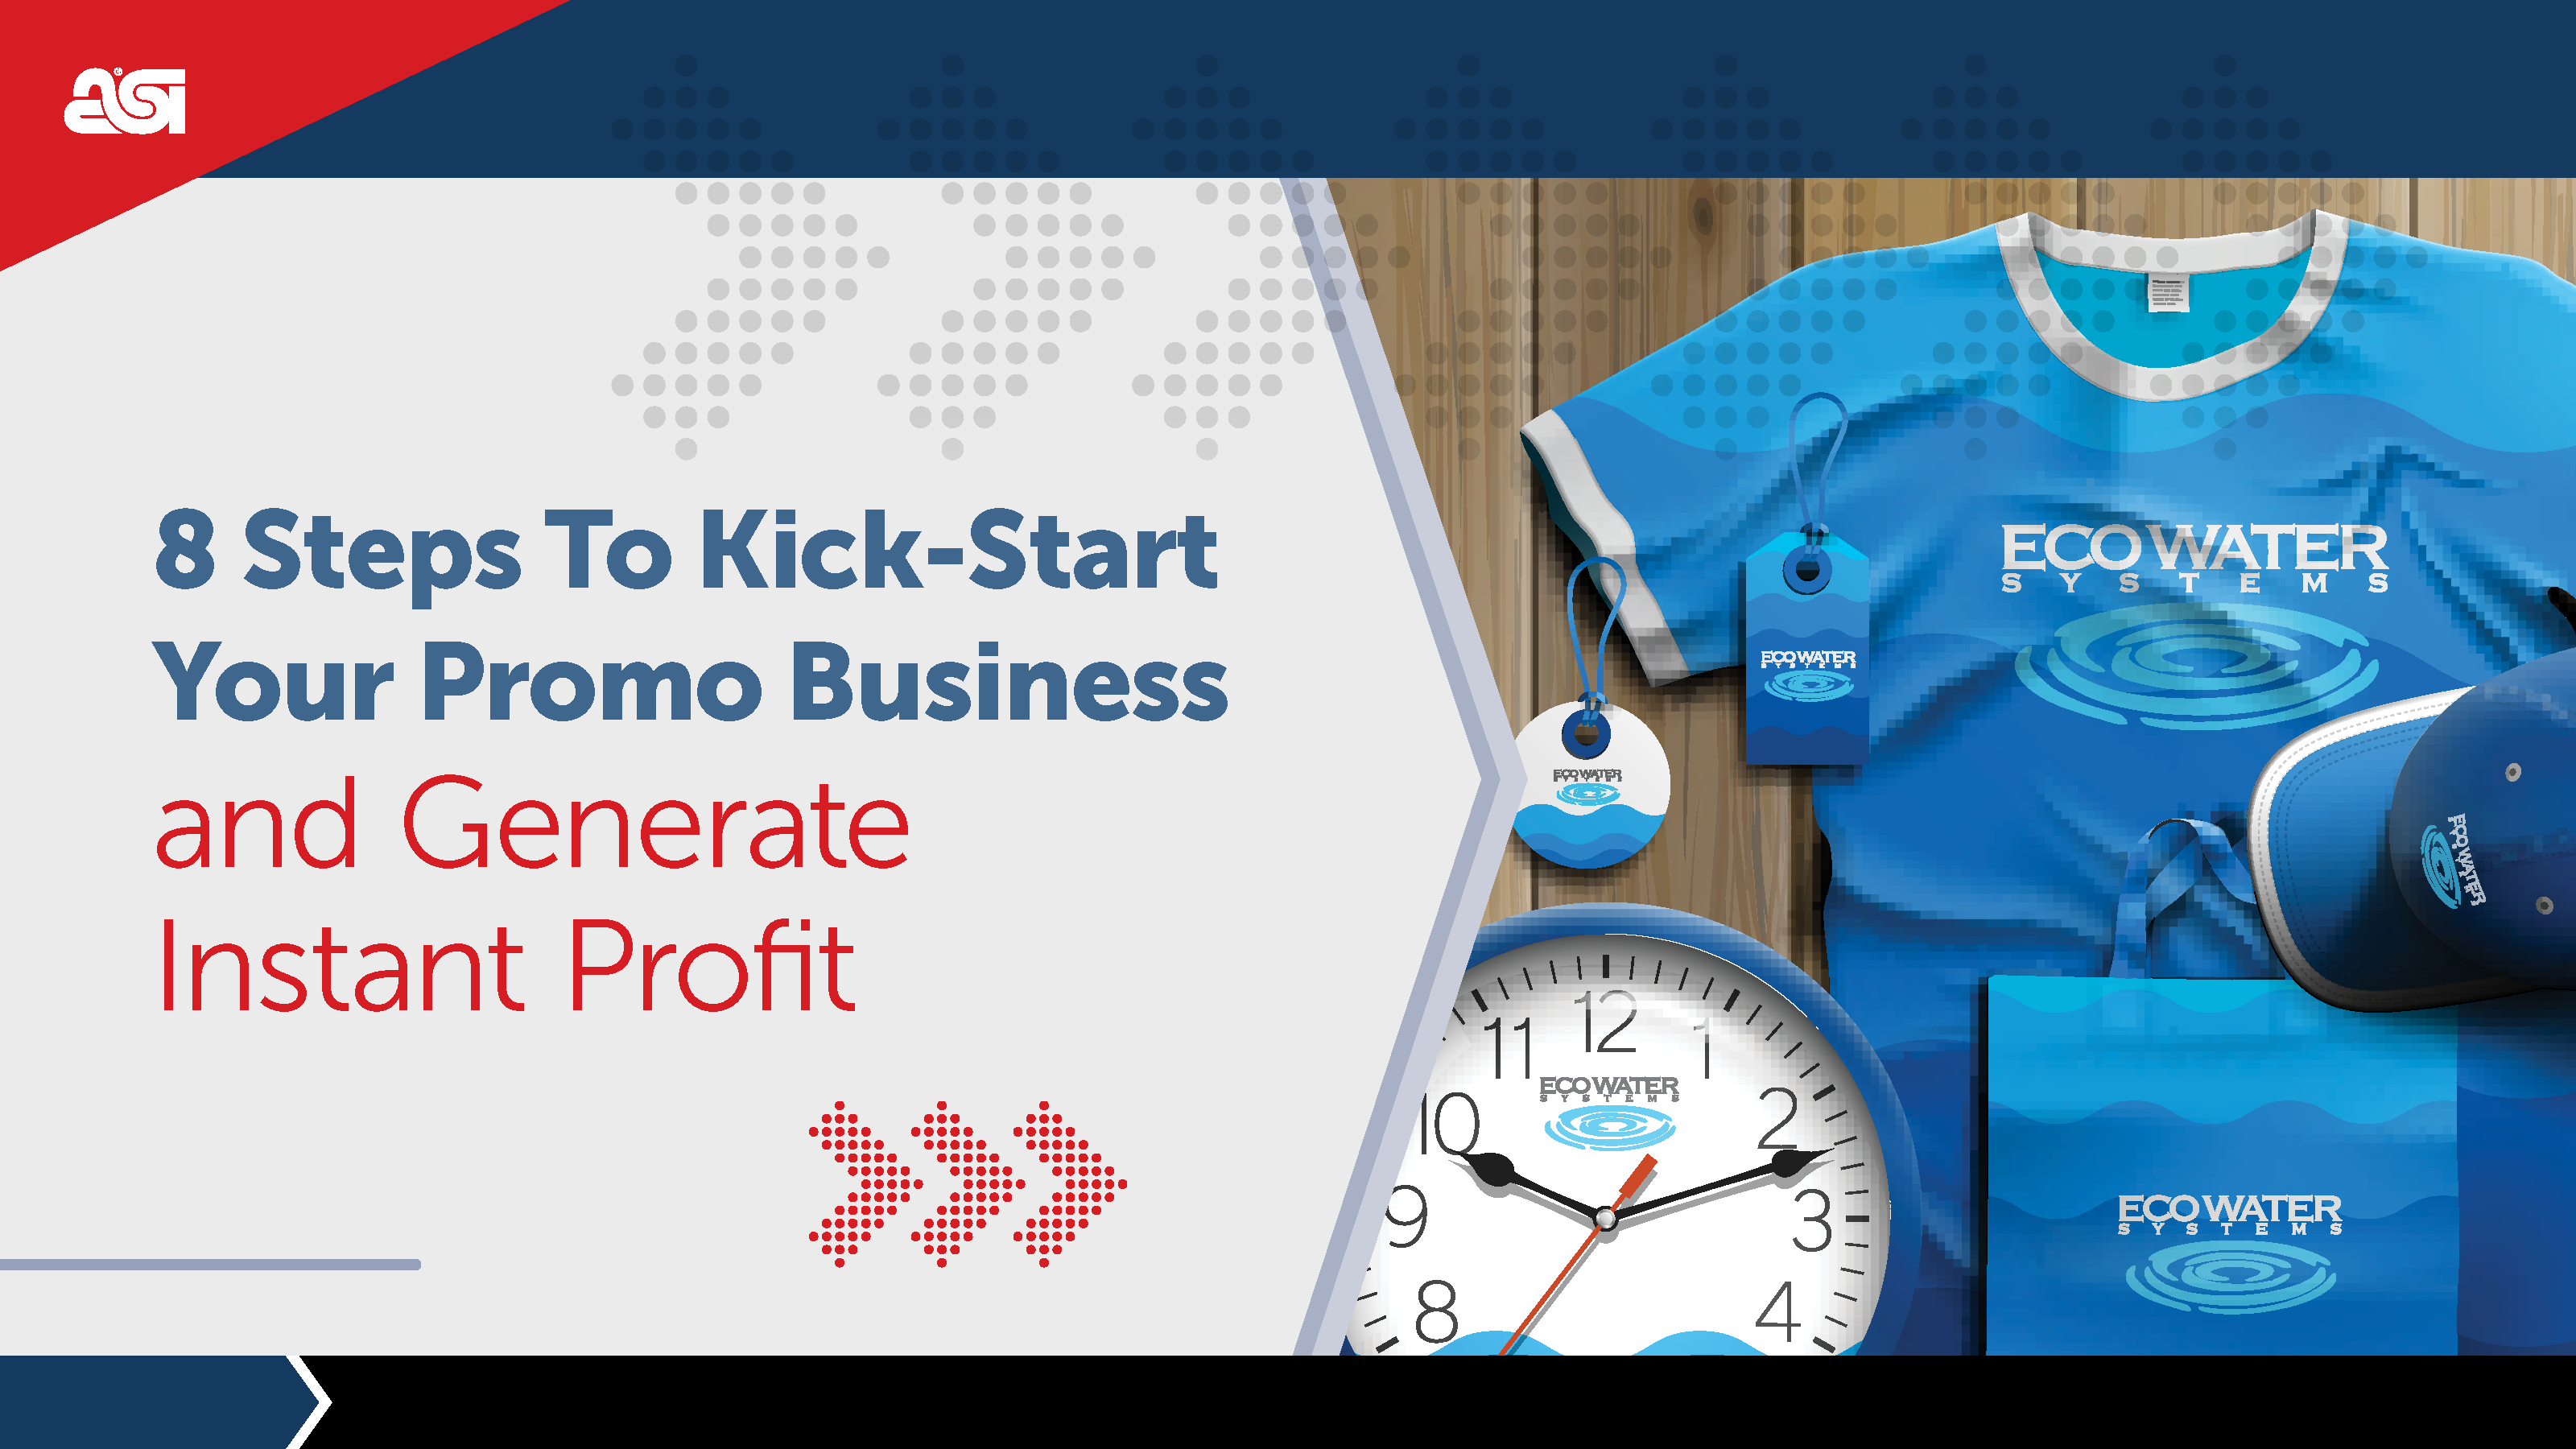 https://asicentral.com/8-steps-to-kick-start-your-promo-business-generate-profit/thank-you/